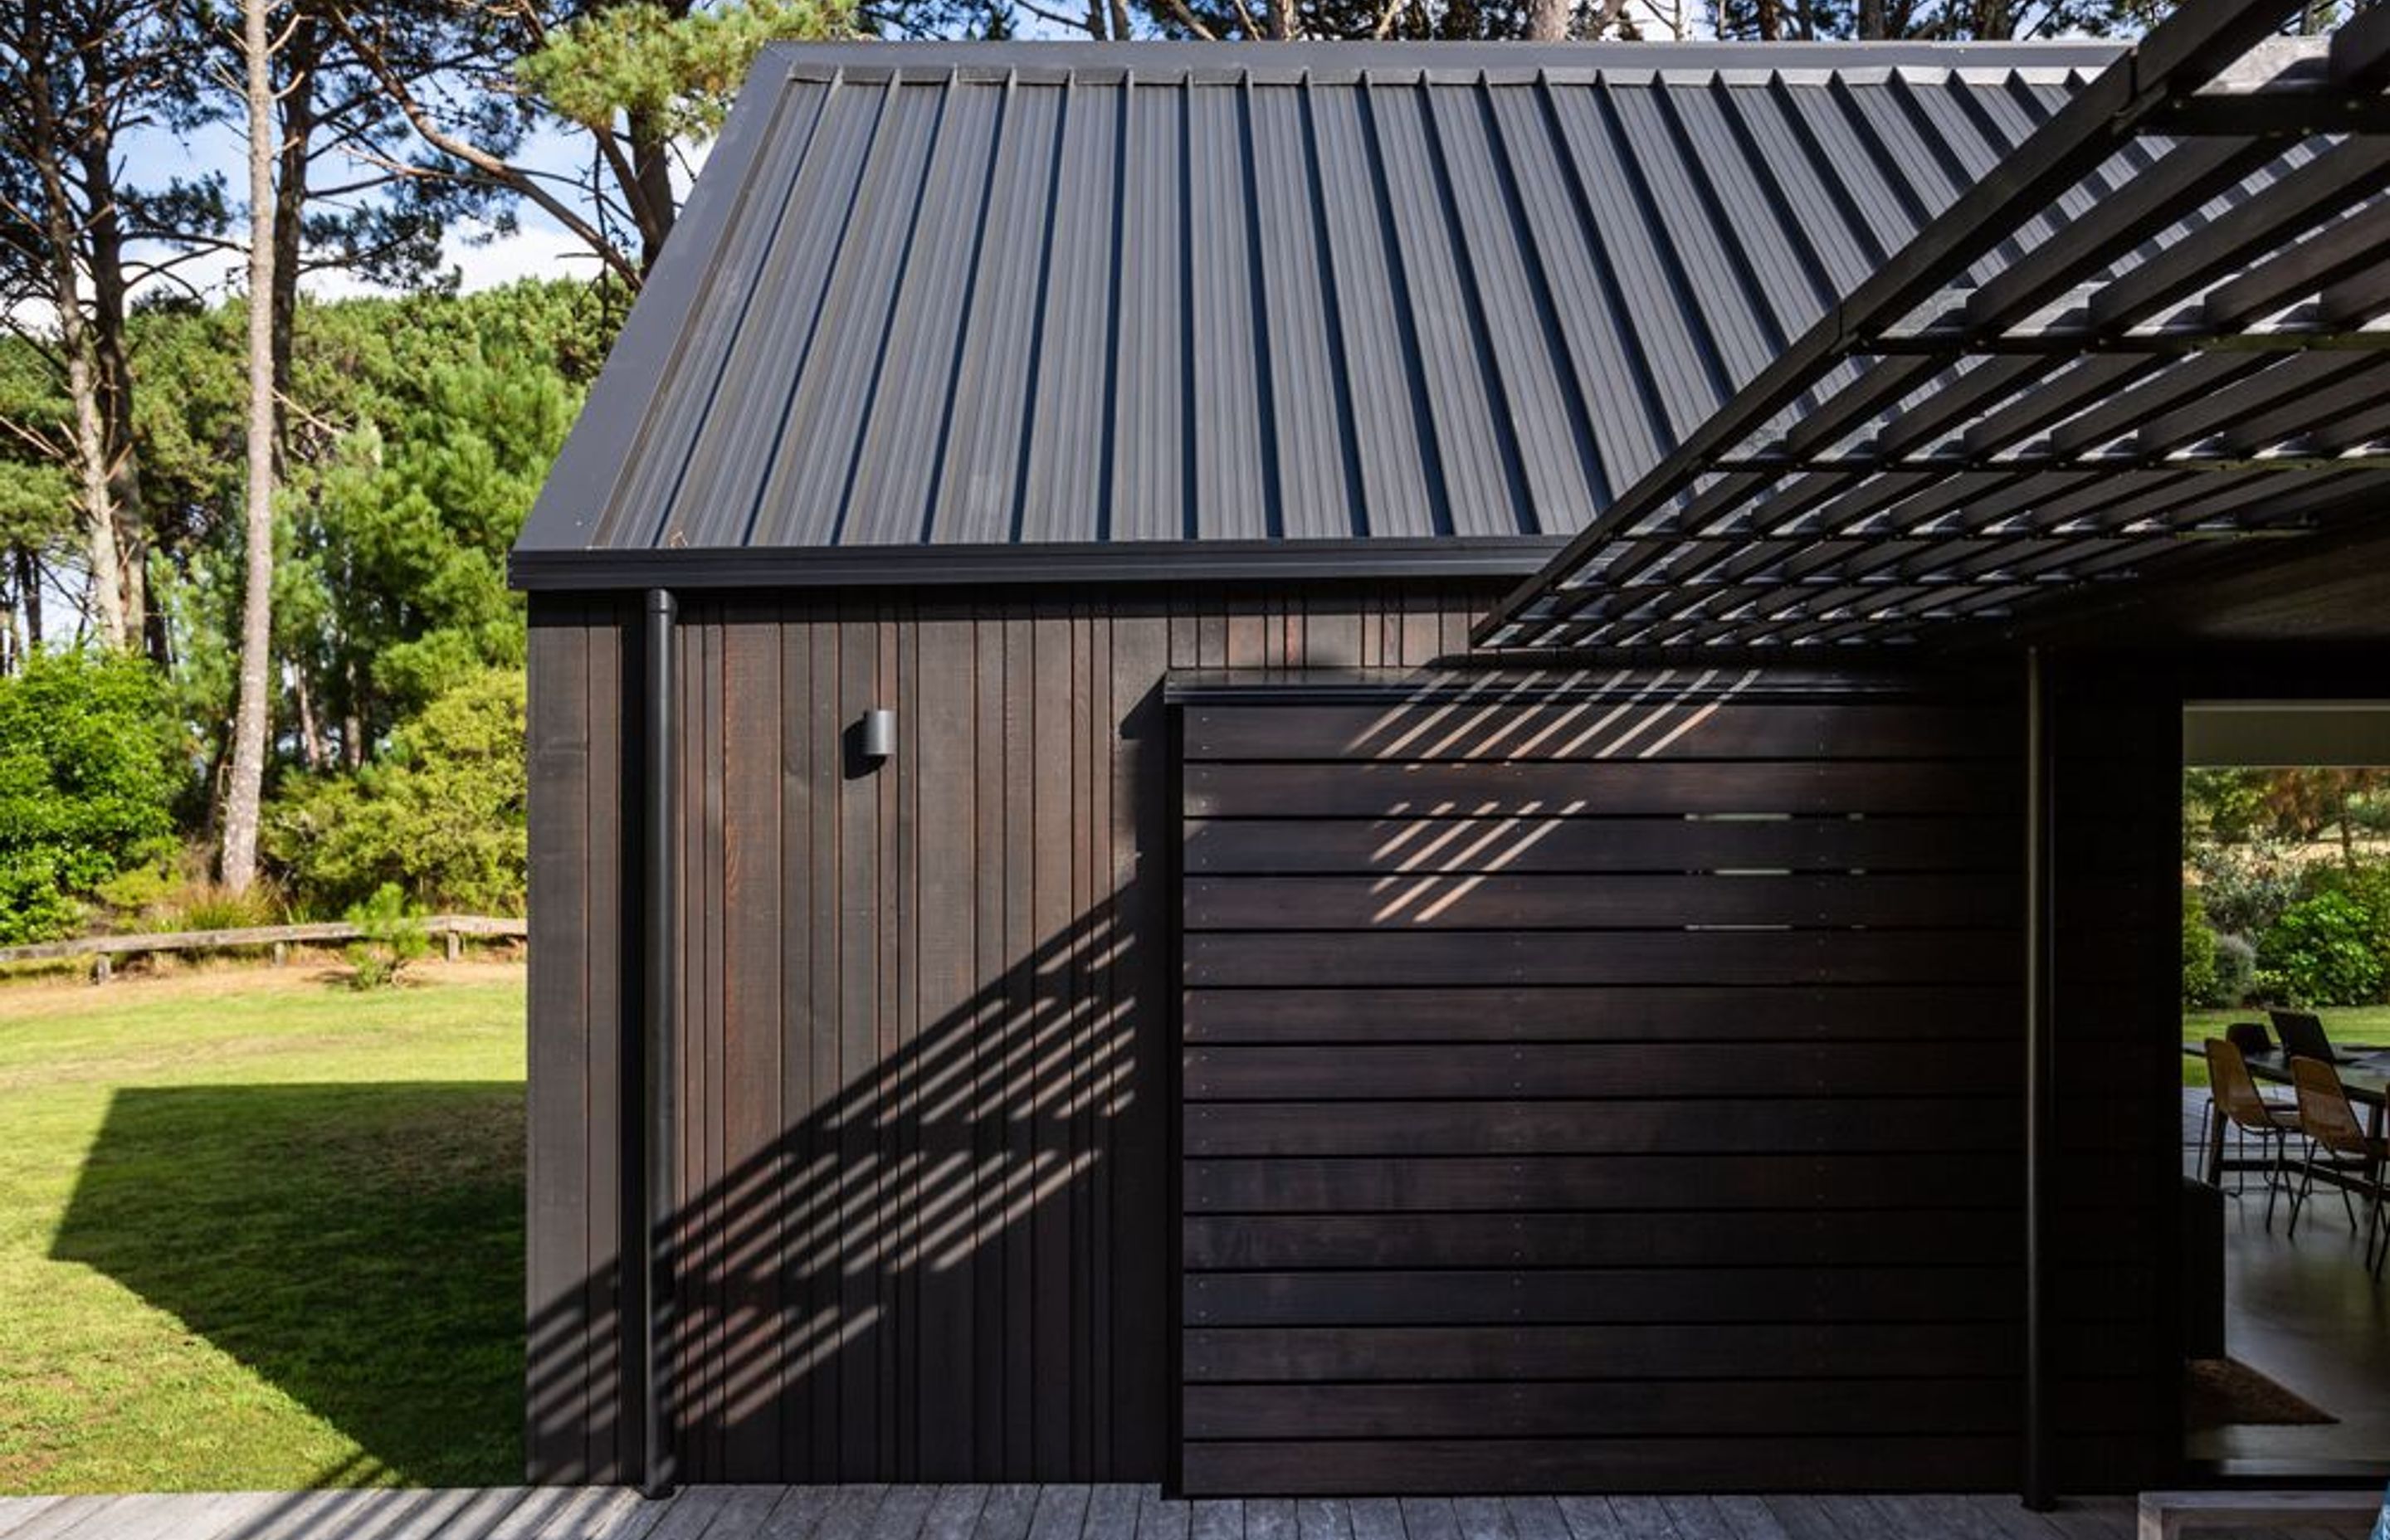 The 45-degree pitched roofs are a literal response to cabins in the woods. They are very clipped; there are no eaves yet the materials create a refined feel.